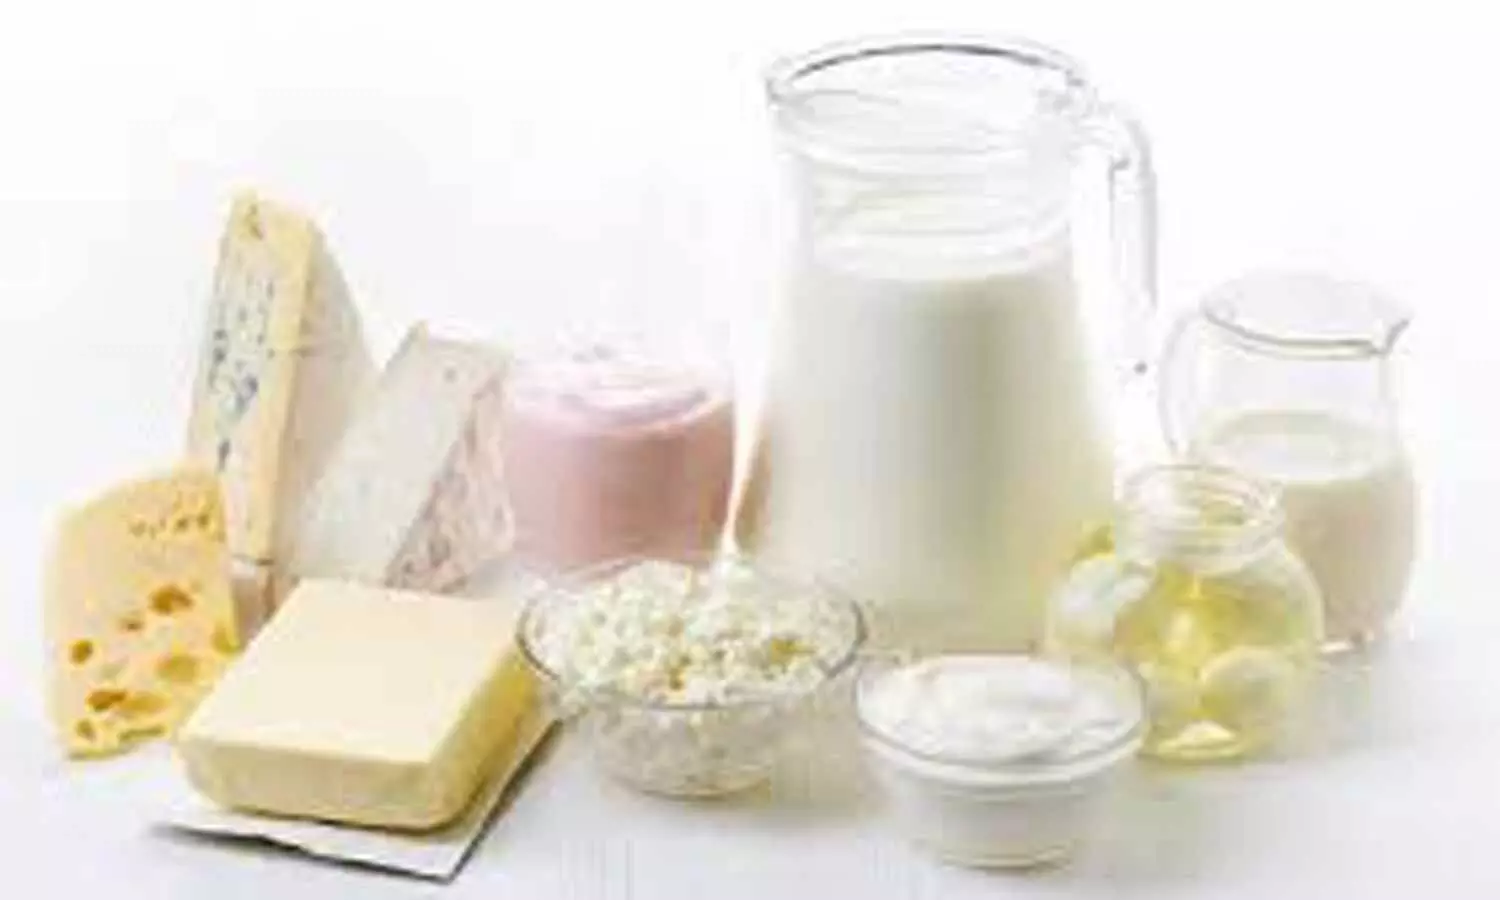 Baked milk improves tolerance to cows milk protein in infants with allergy